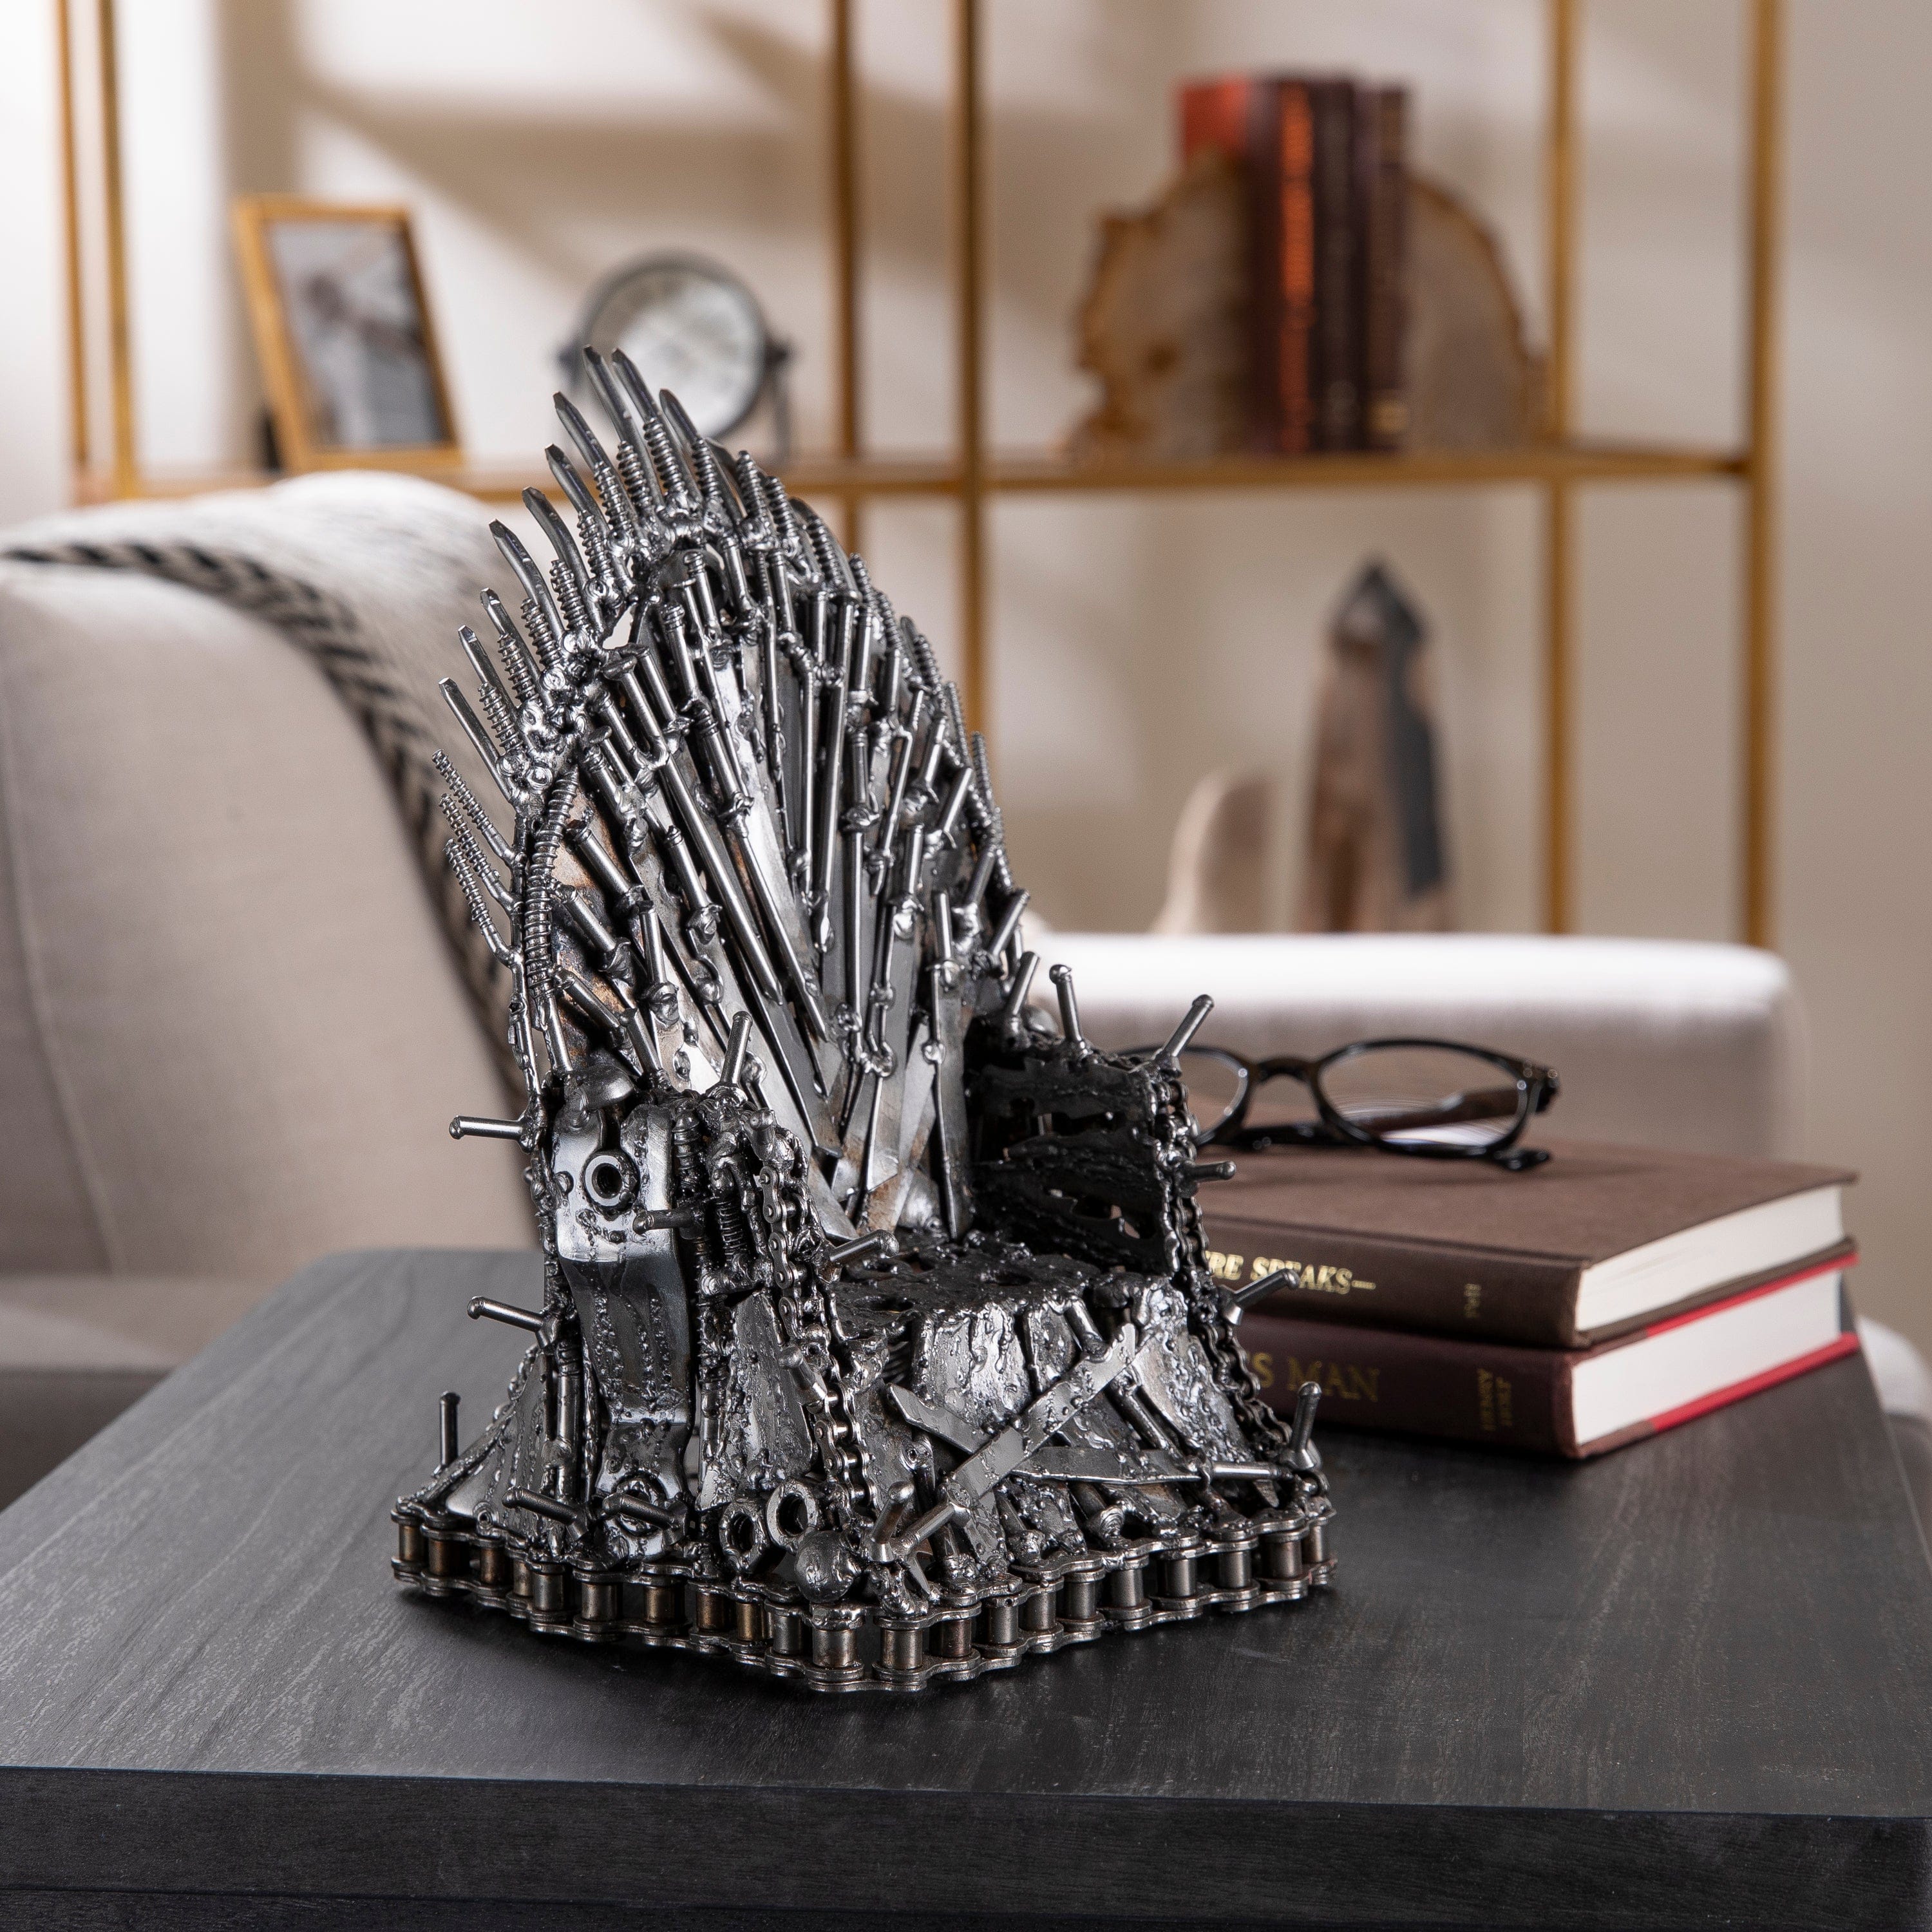 Kalifano Recycled Metal Art Game of Thrones, Throne Inspired Recycled Metal Sculpture RMS-TH28x20-N